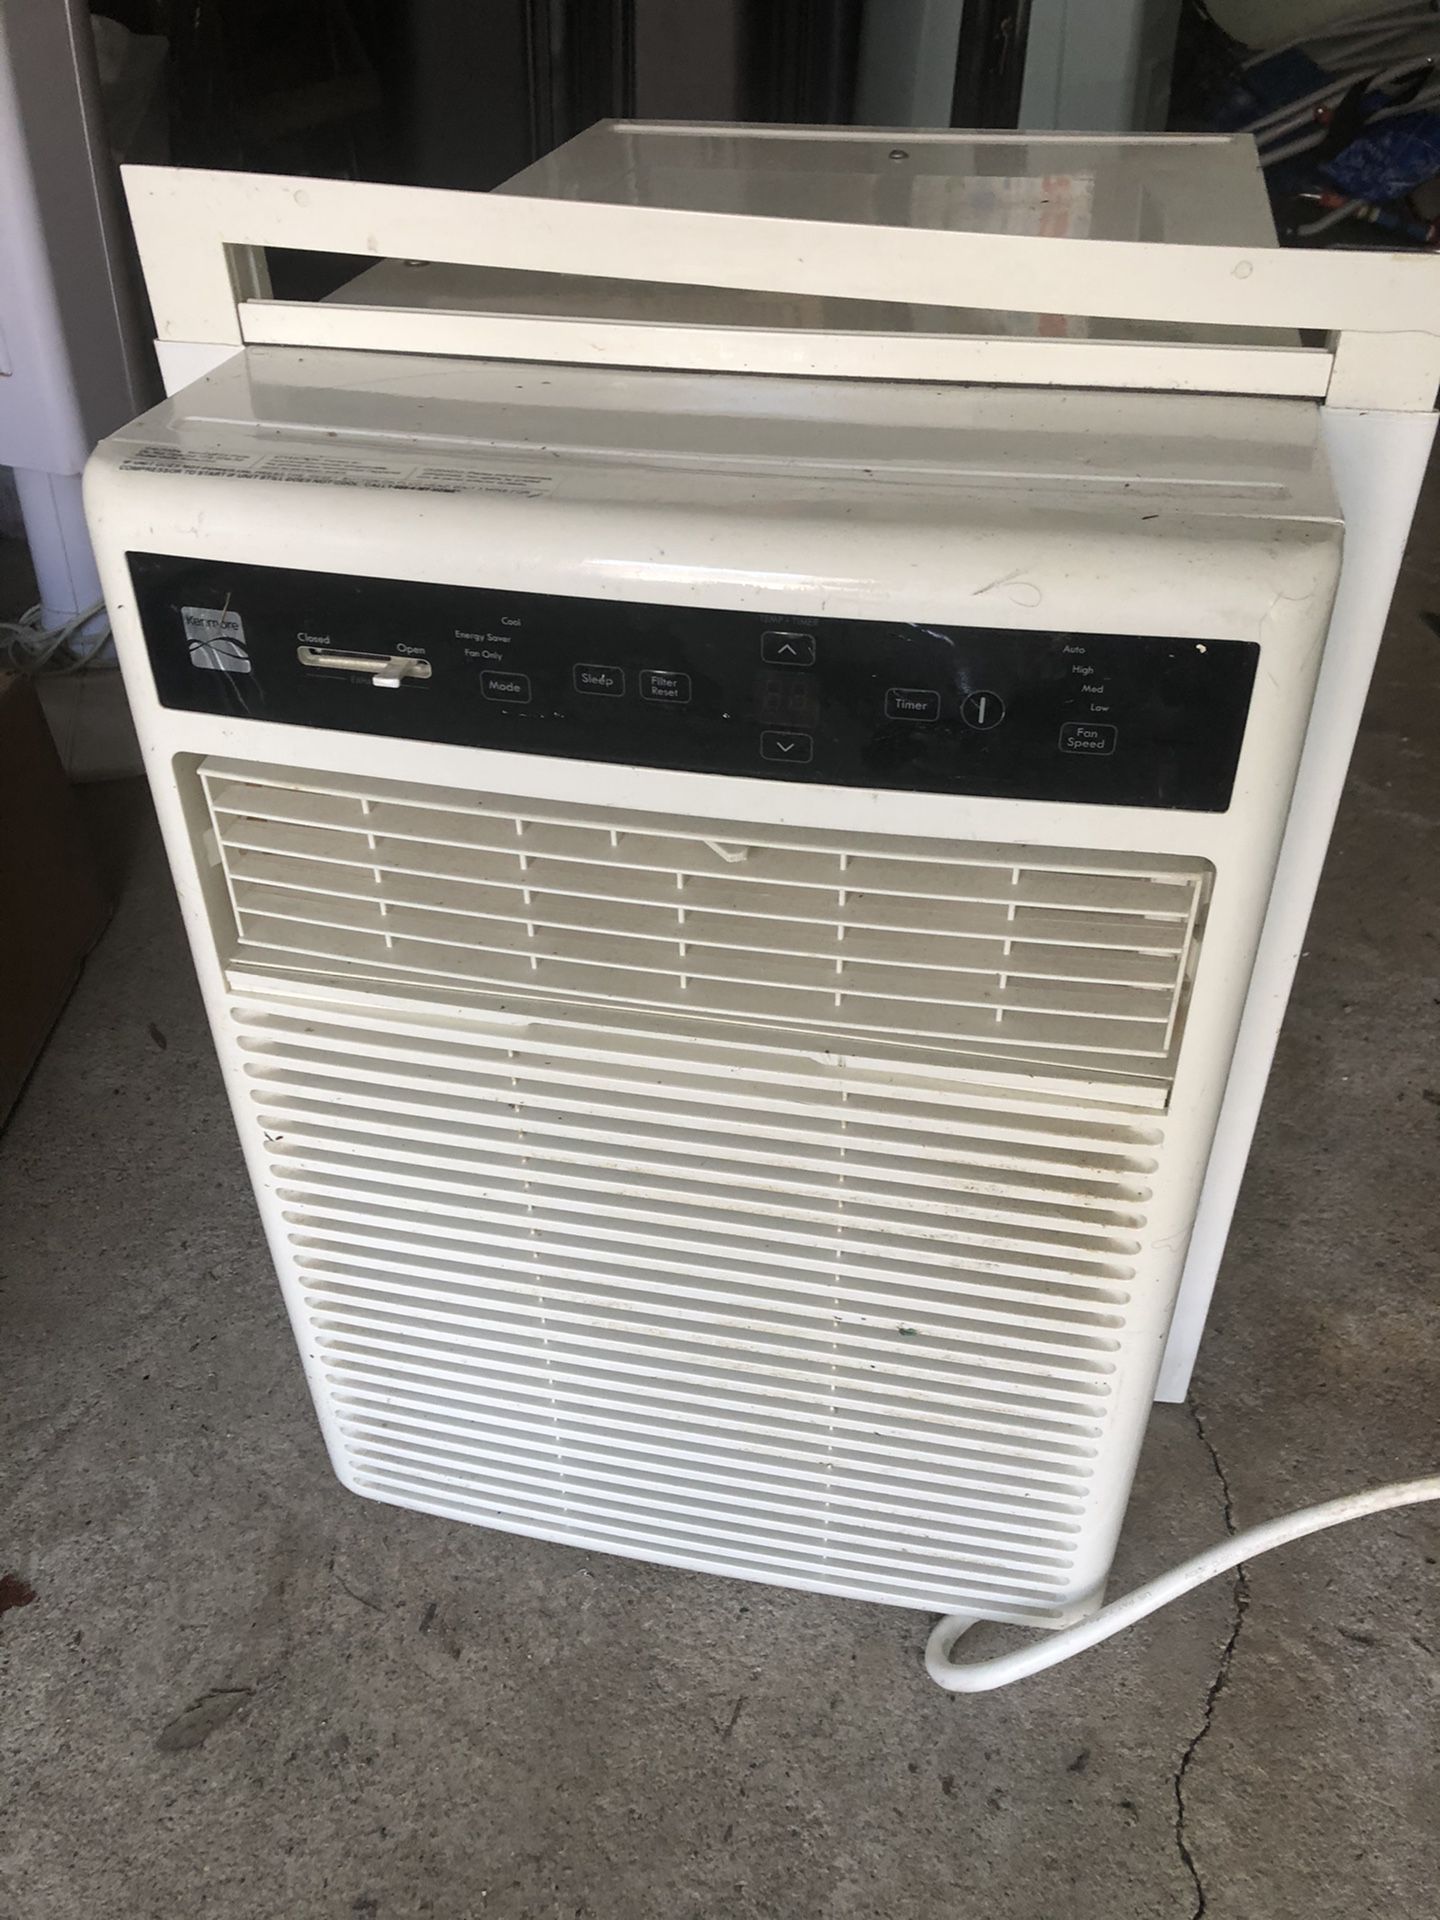 Kenmore elite window ac air conditioner with the remote control